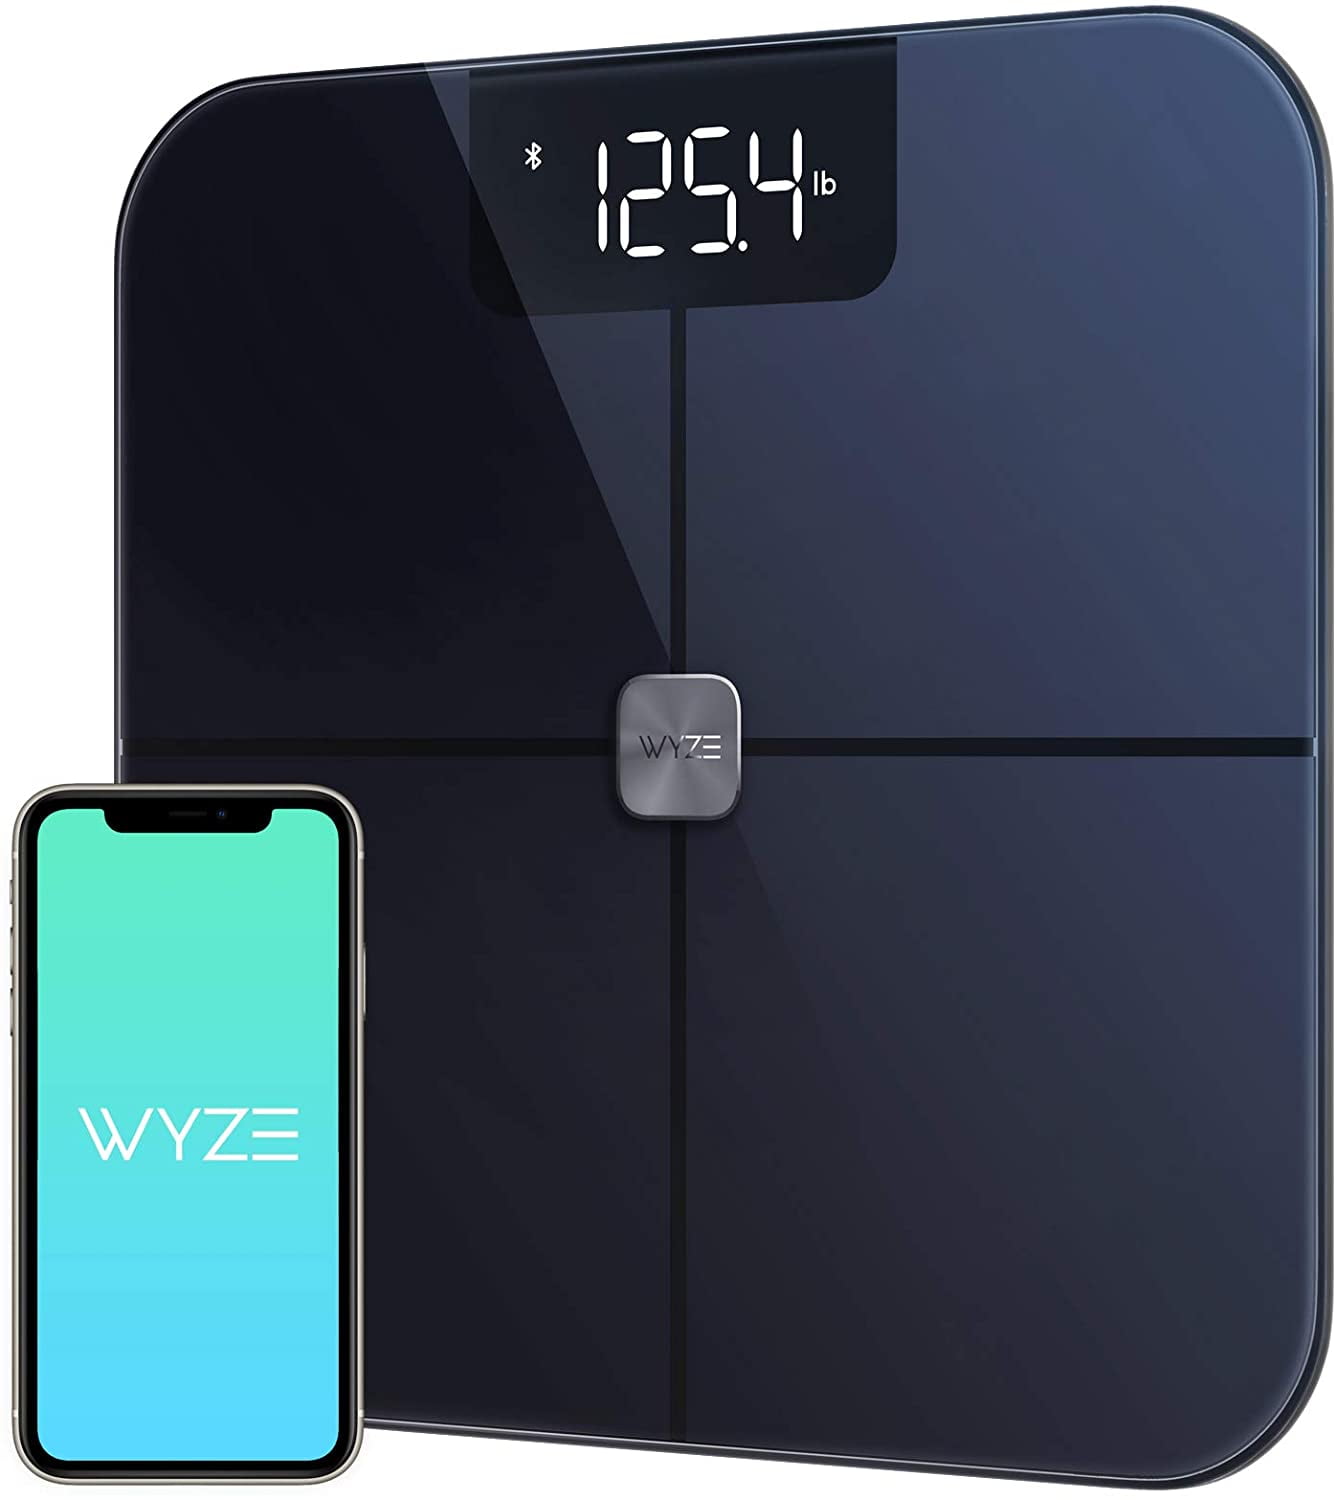 Do Smart Scales Measure Body Fat Percentage Accurately? Best Smart Scale  2020 